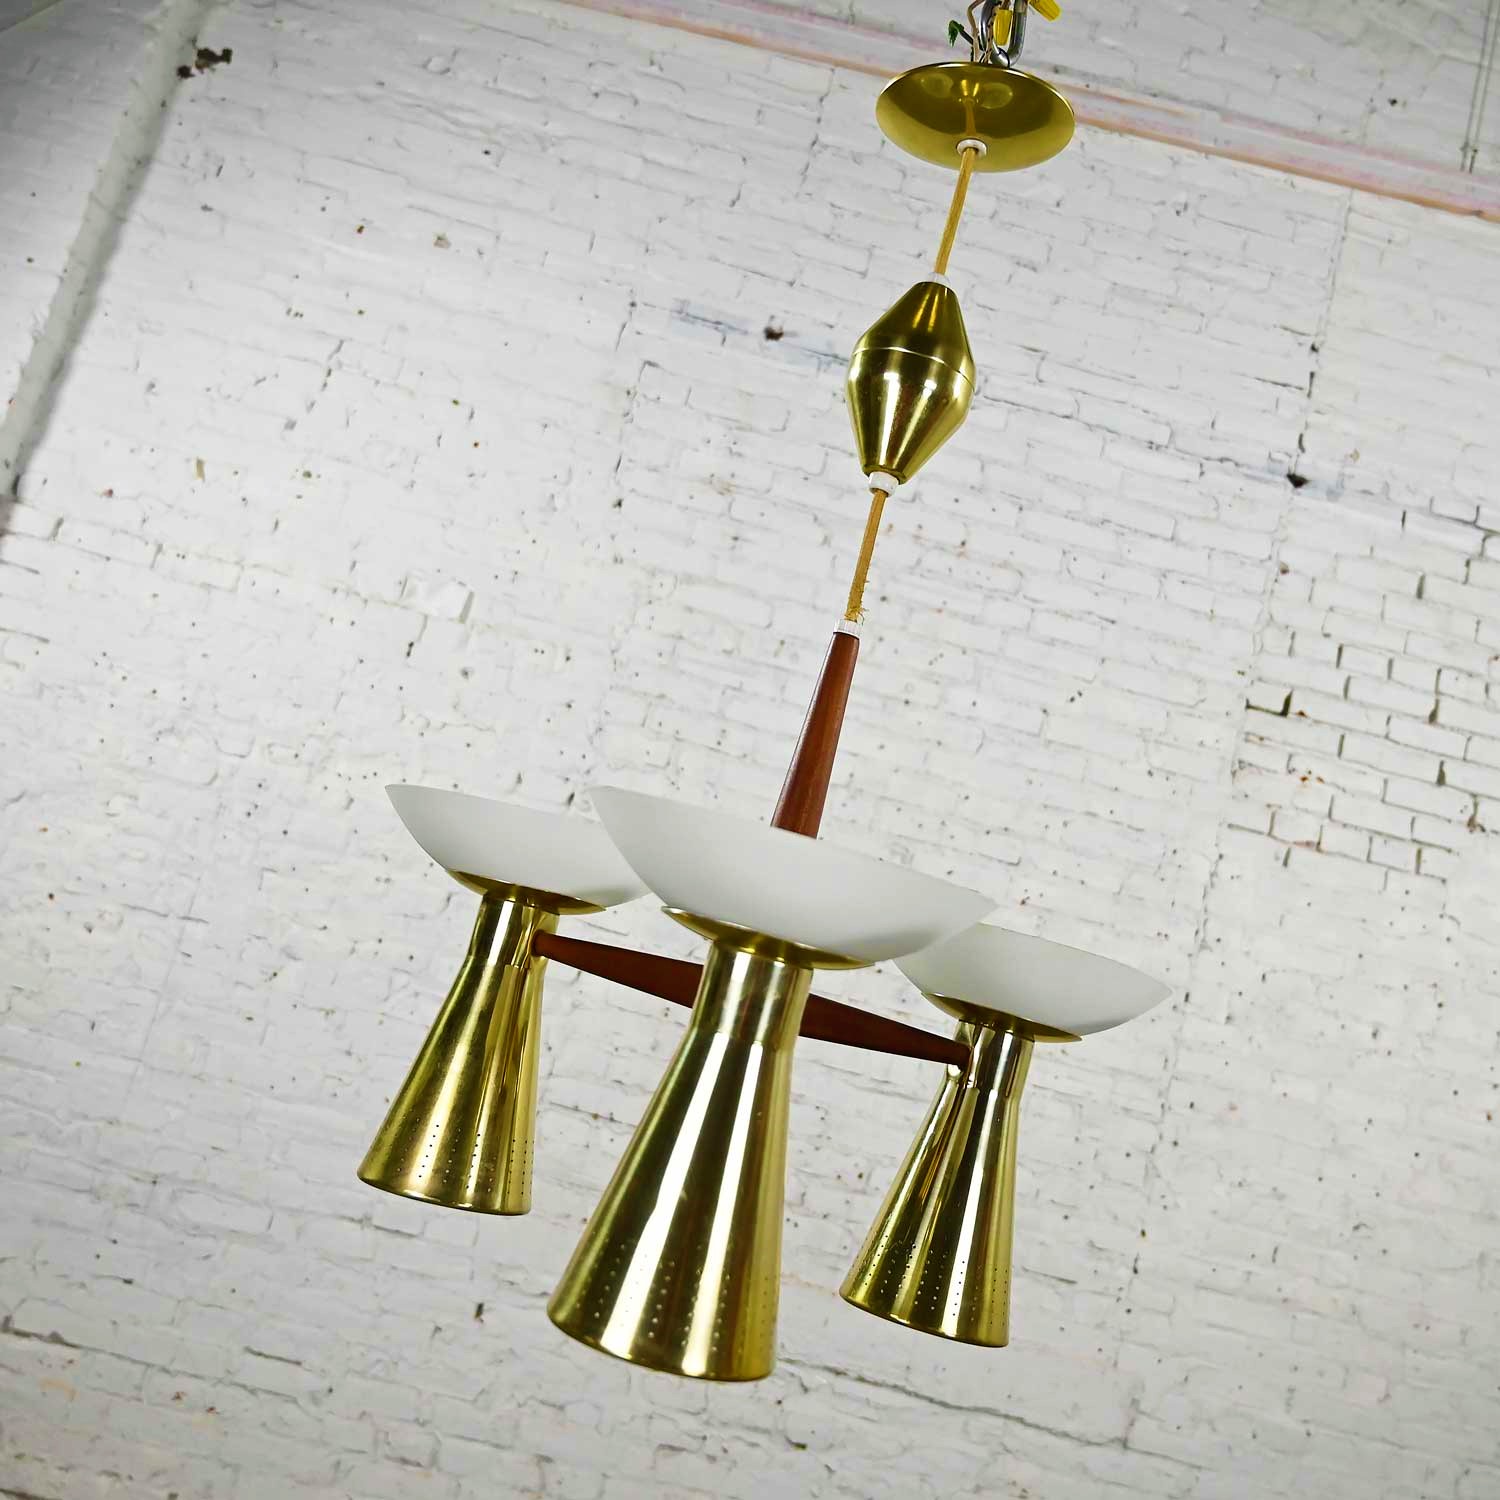 MCM Emerson Pull Down Pendant Light Fixture by Imperialites Walnut Brass Plate & White Glass Bowl Shades